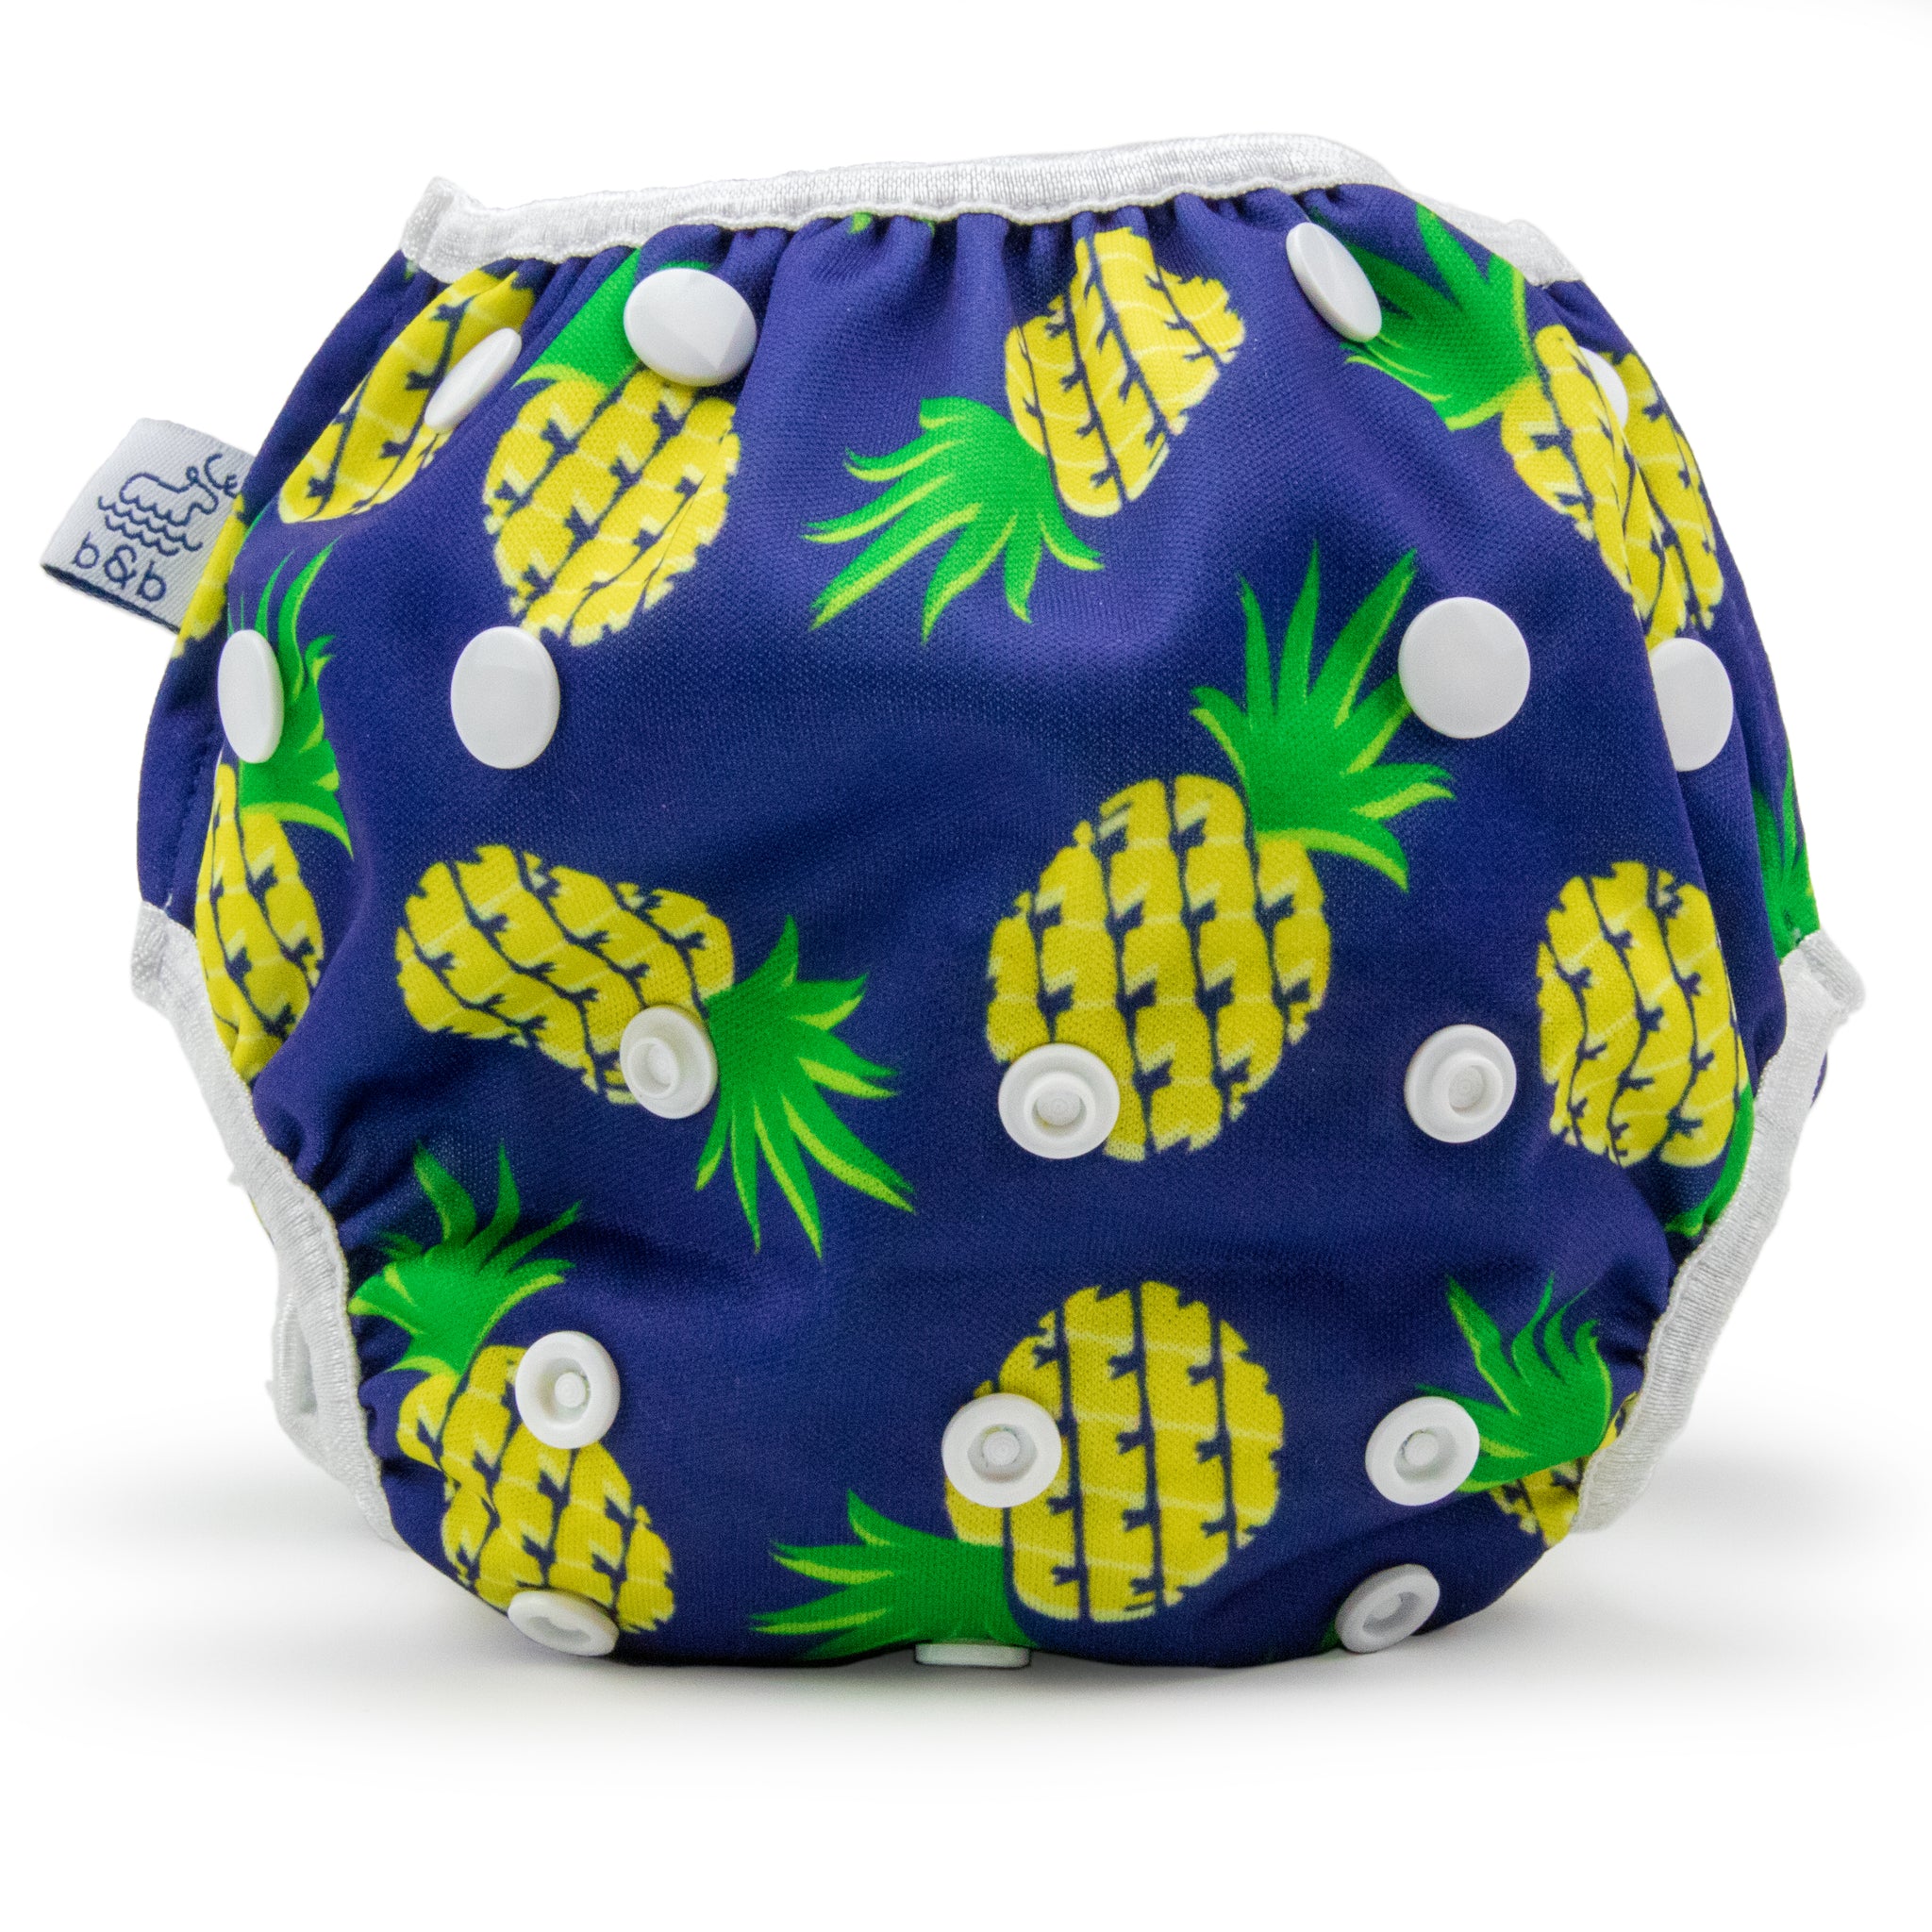 Beau and Belle Littles Swim Diaper, Regular Size, Navy blue with pineapples, front view